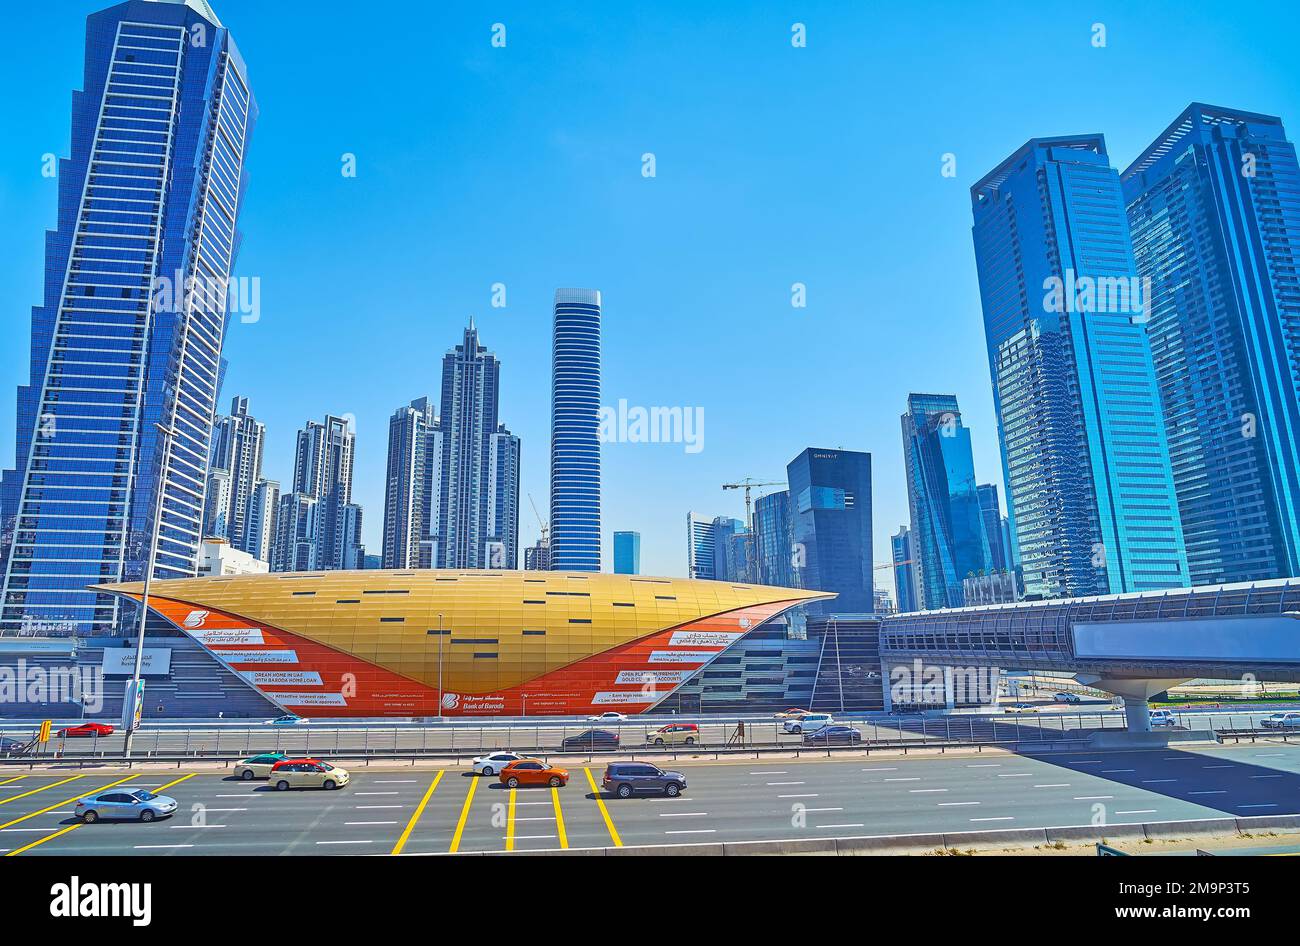 DUBAI, UAE - MARCH 6, 2020: Sheikh Zayed road with futuristic pavilion of Business Bay metro station, Al Batha Tower, Executive Towers, Bay Gate Tower Stock Photo